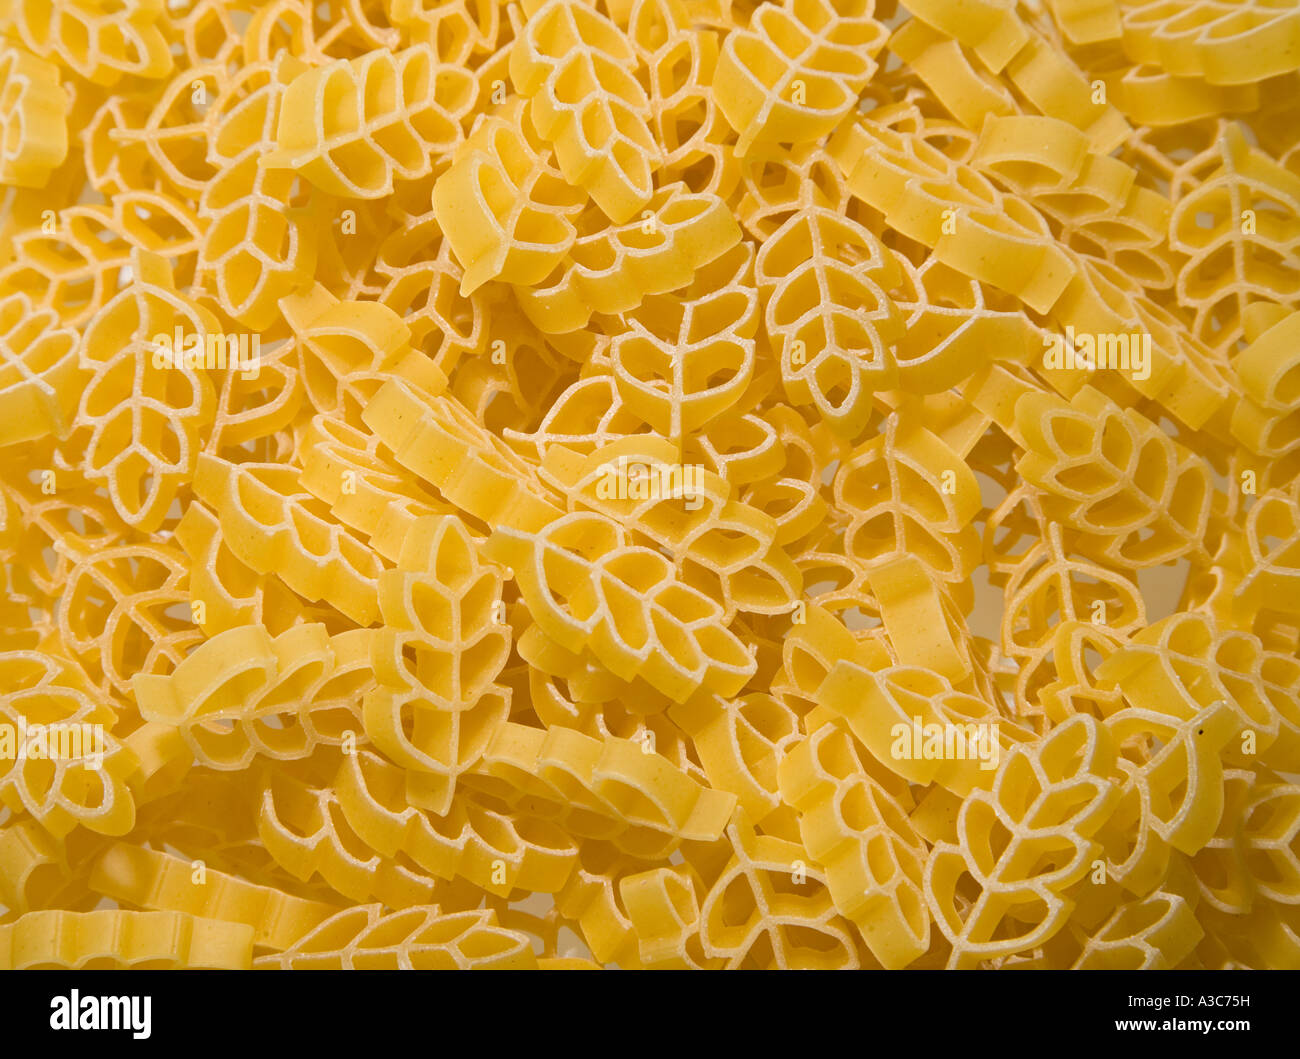 Download Pasta Spighe Shapes Made From Durum Wheat Stock Photo Alamy Yellowimages Mockups